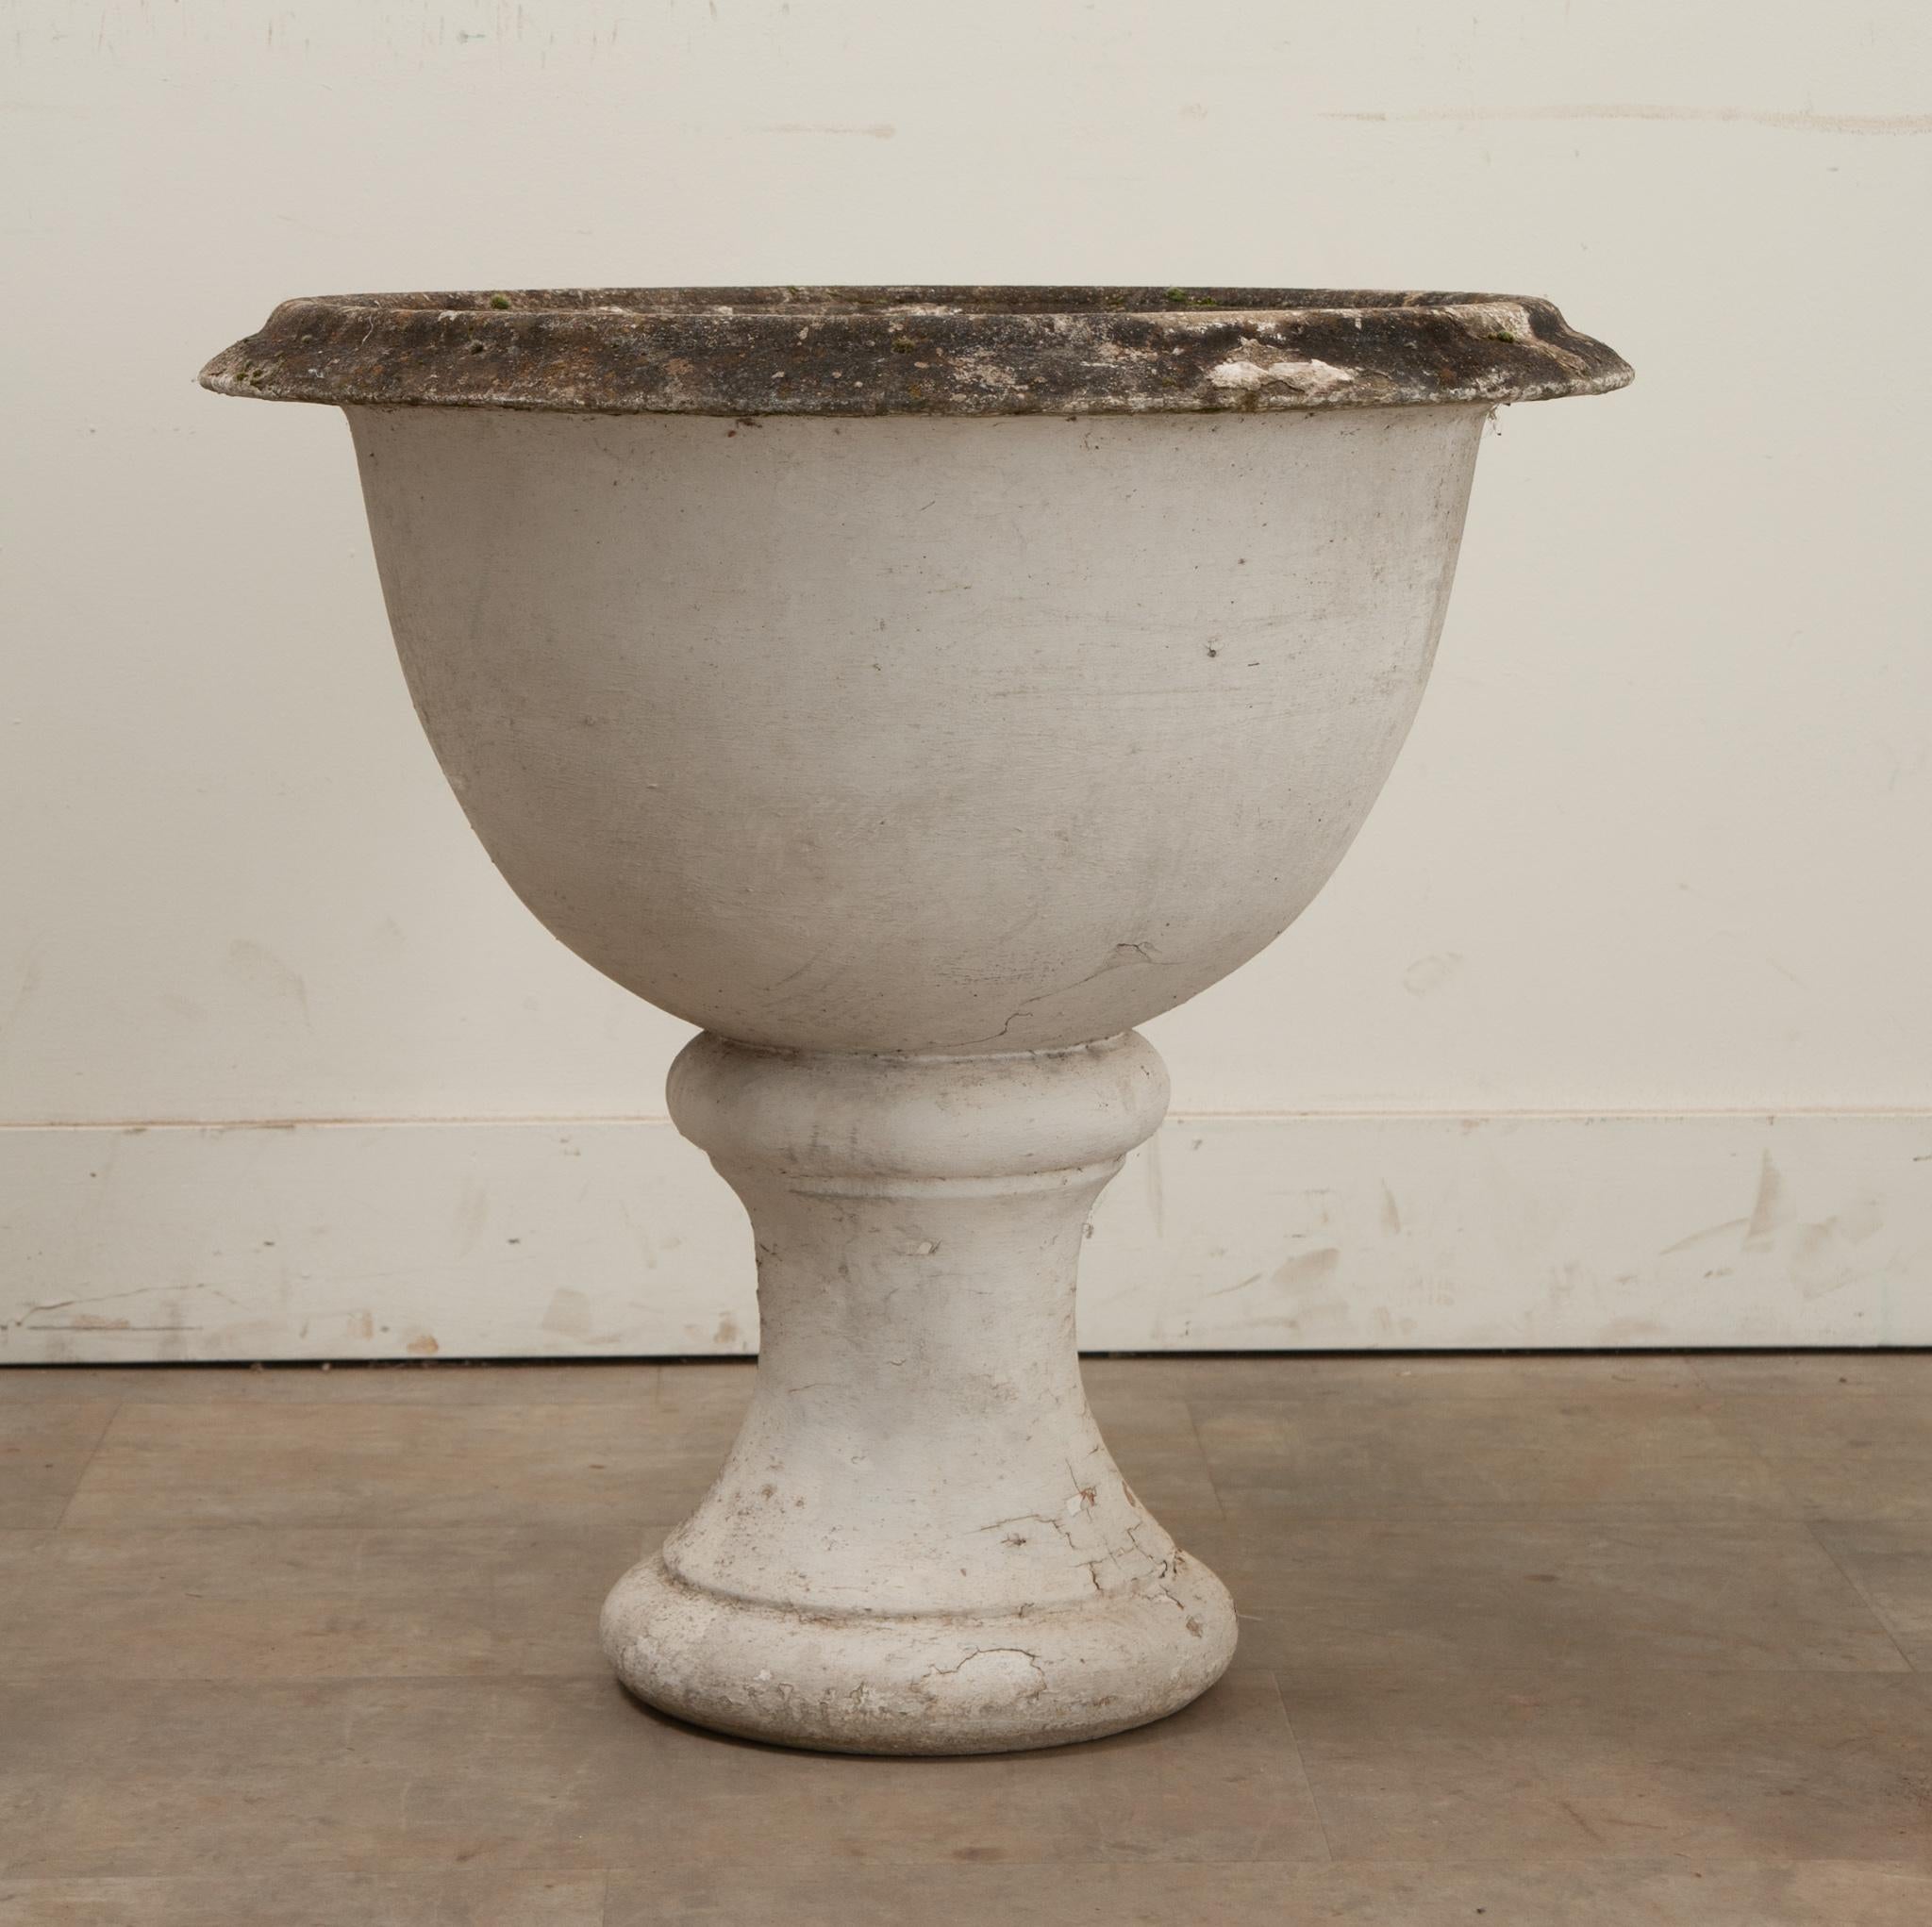 A stone planter from the Netherlands. This impressive planter is made from stone and is shaped to include a pedestal. There is a piece of the planter’s rim missing, be sure to view the detailed images to see the current condition of this garden